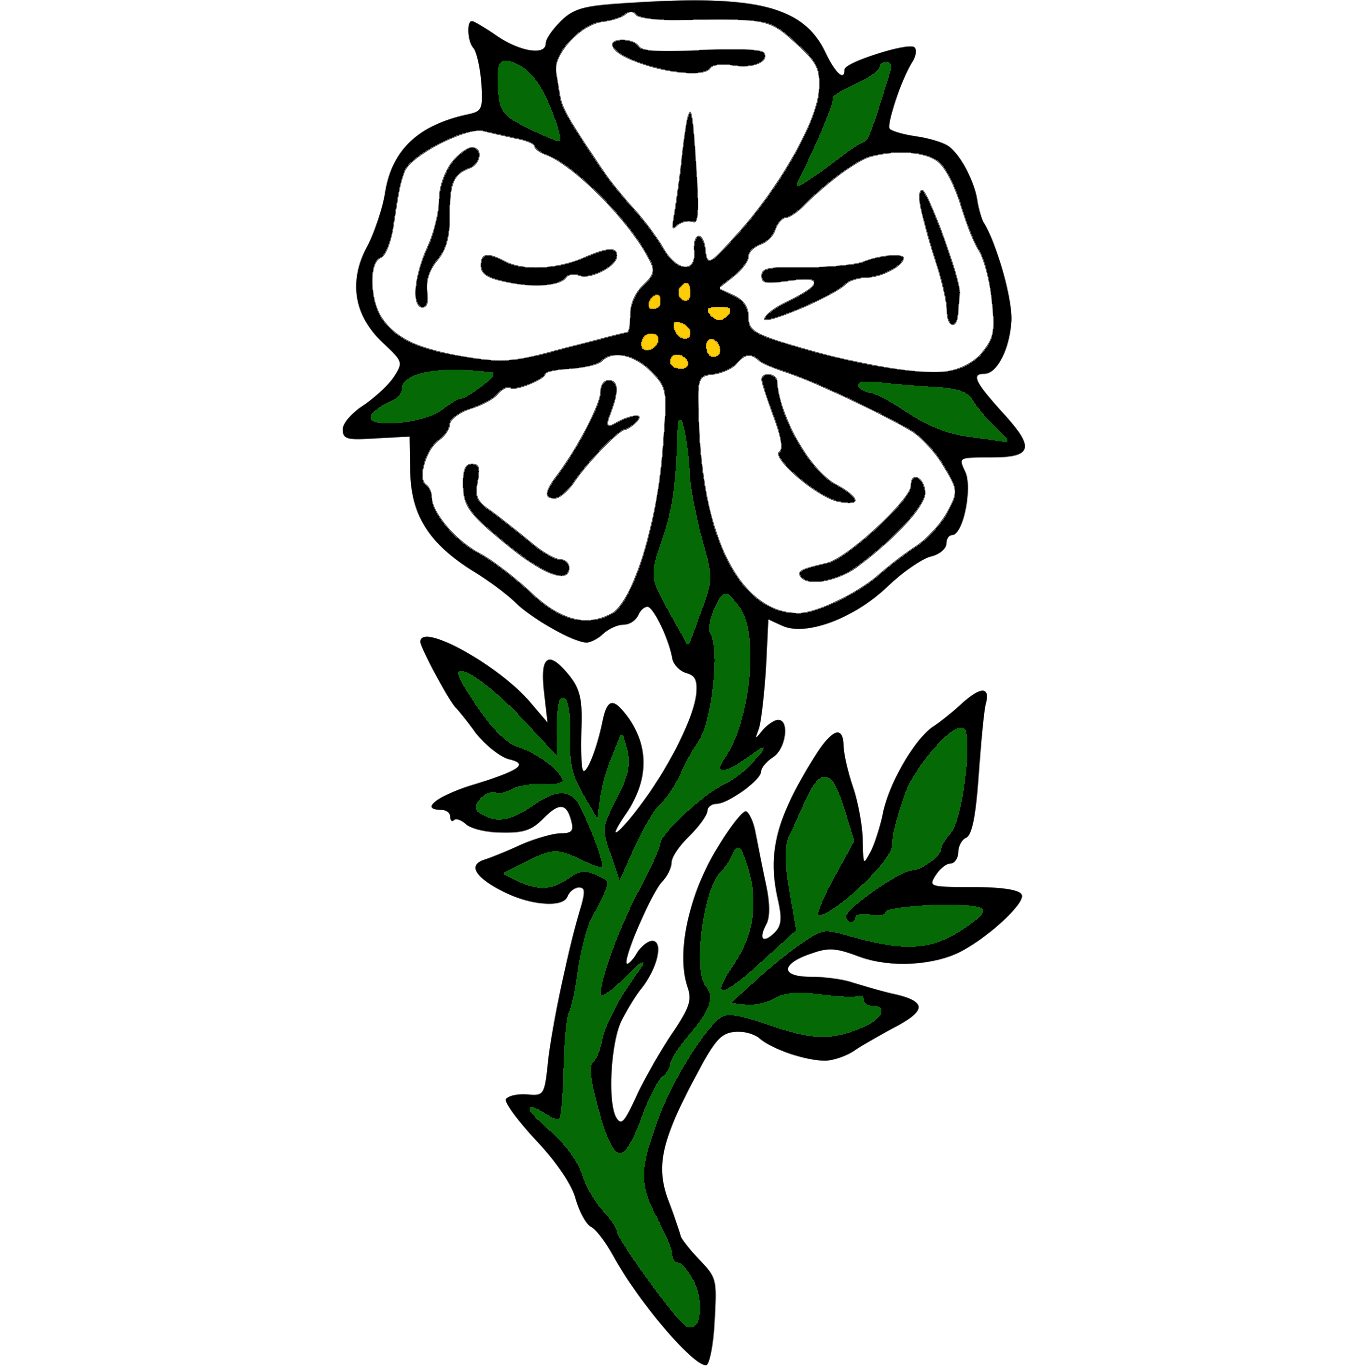 (Fieldless) A rose argent, barbed and seeded, slipped and leaved, proper.